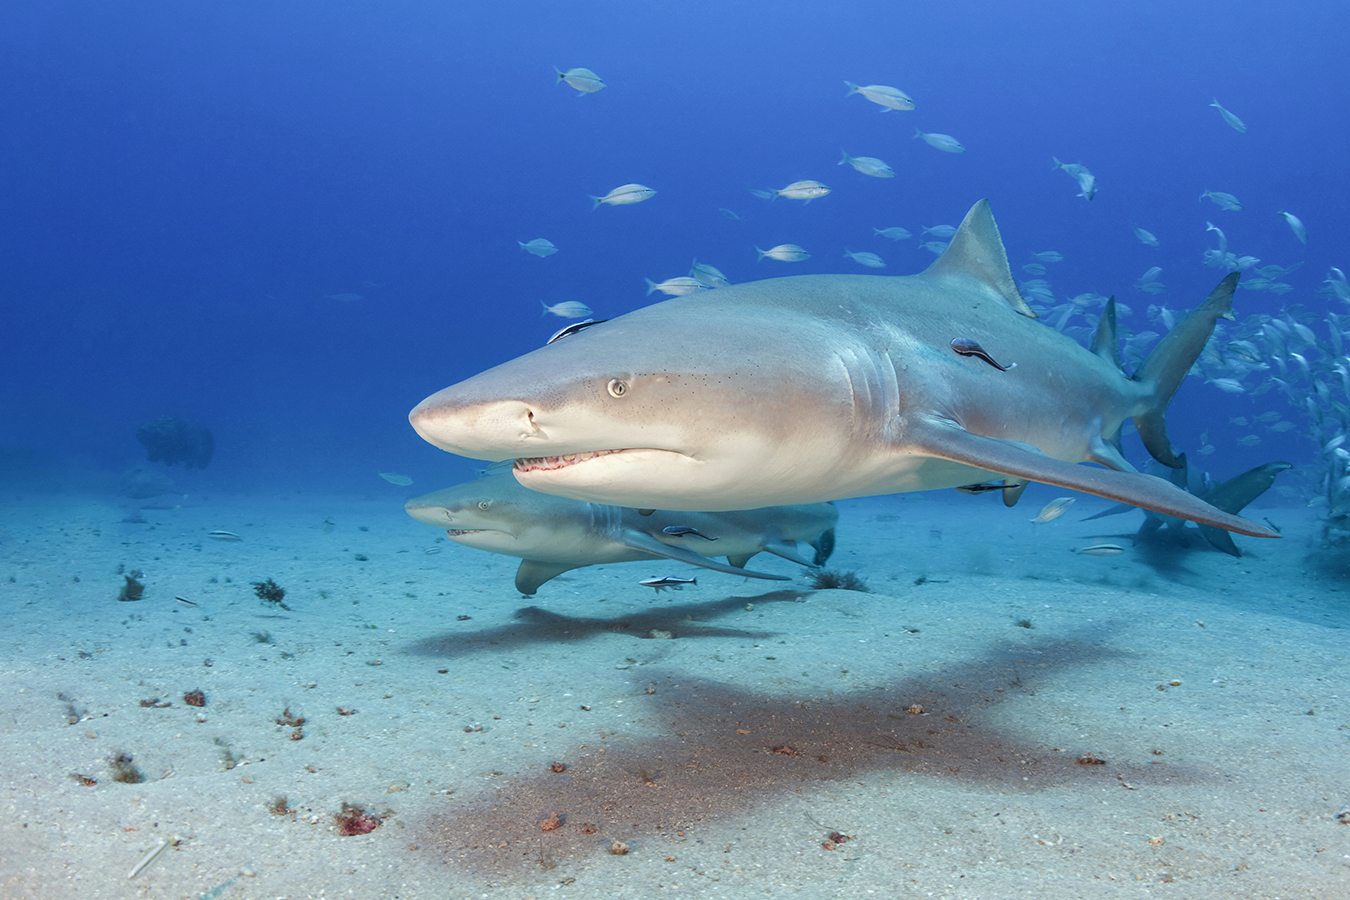 This lemon shark portrait was taken during a shark dive off the coast of Jupiter Florida in 90 feet of water back 2014. The camera used for this particular shot was a Canon 7D fitted with a Tokina 10-17 fisheye zoom lens with the lighting provided by a pair of Sea & Sea YS-250’s set on half power.